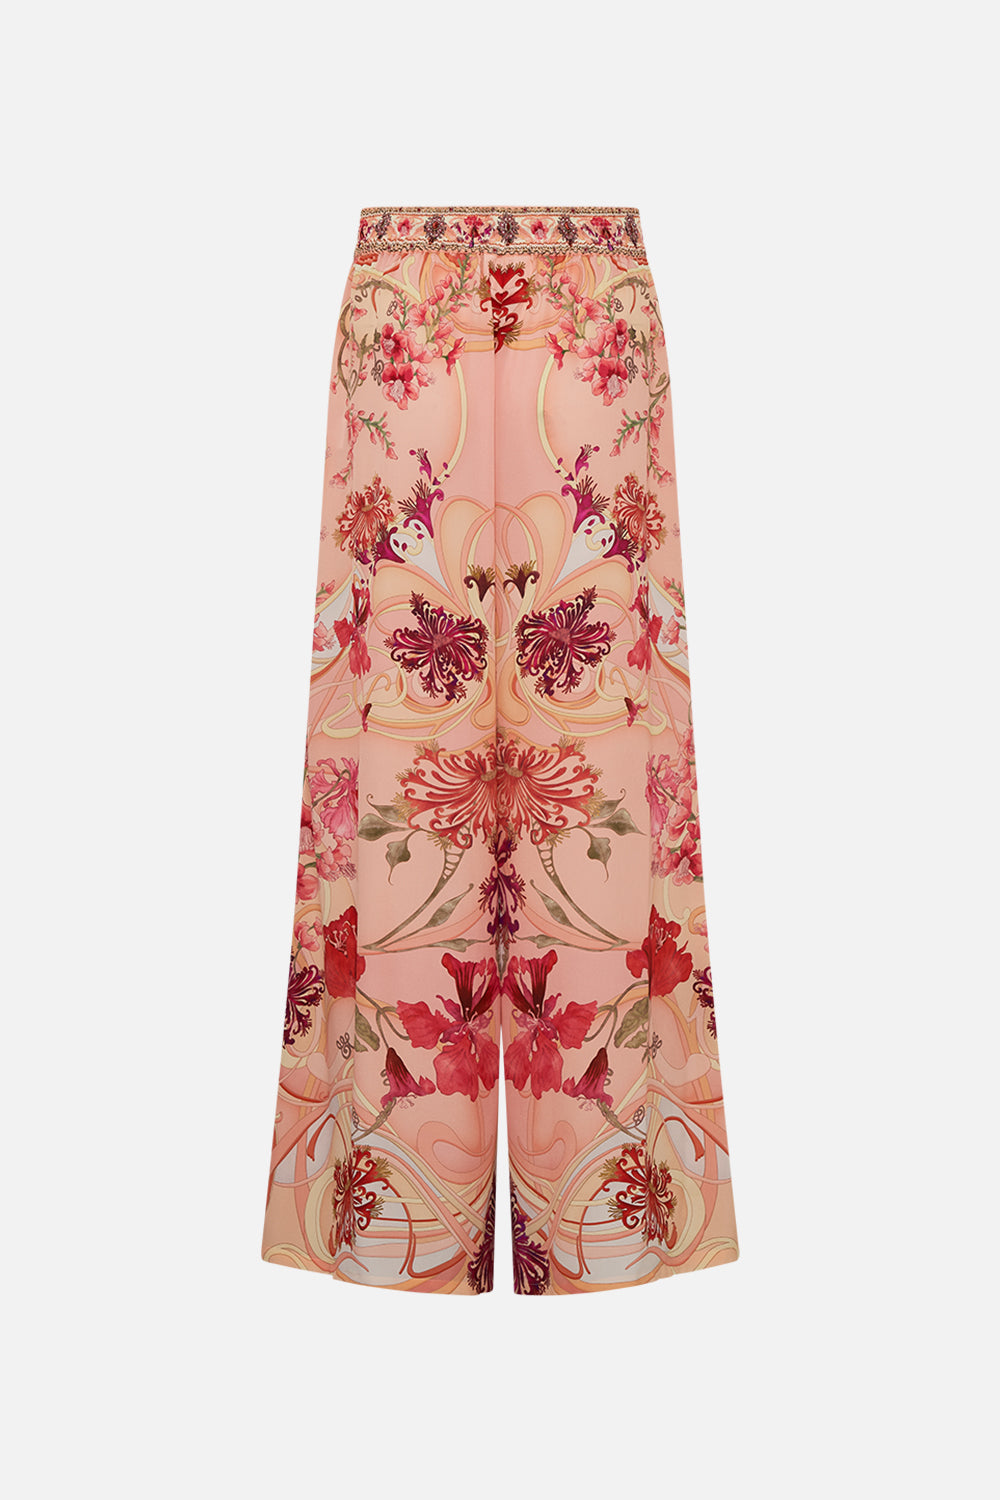 CAMILLA floral Straight Leg Pant in Blossoms and Brushstrokes